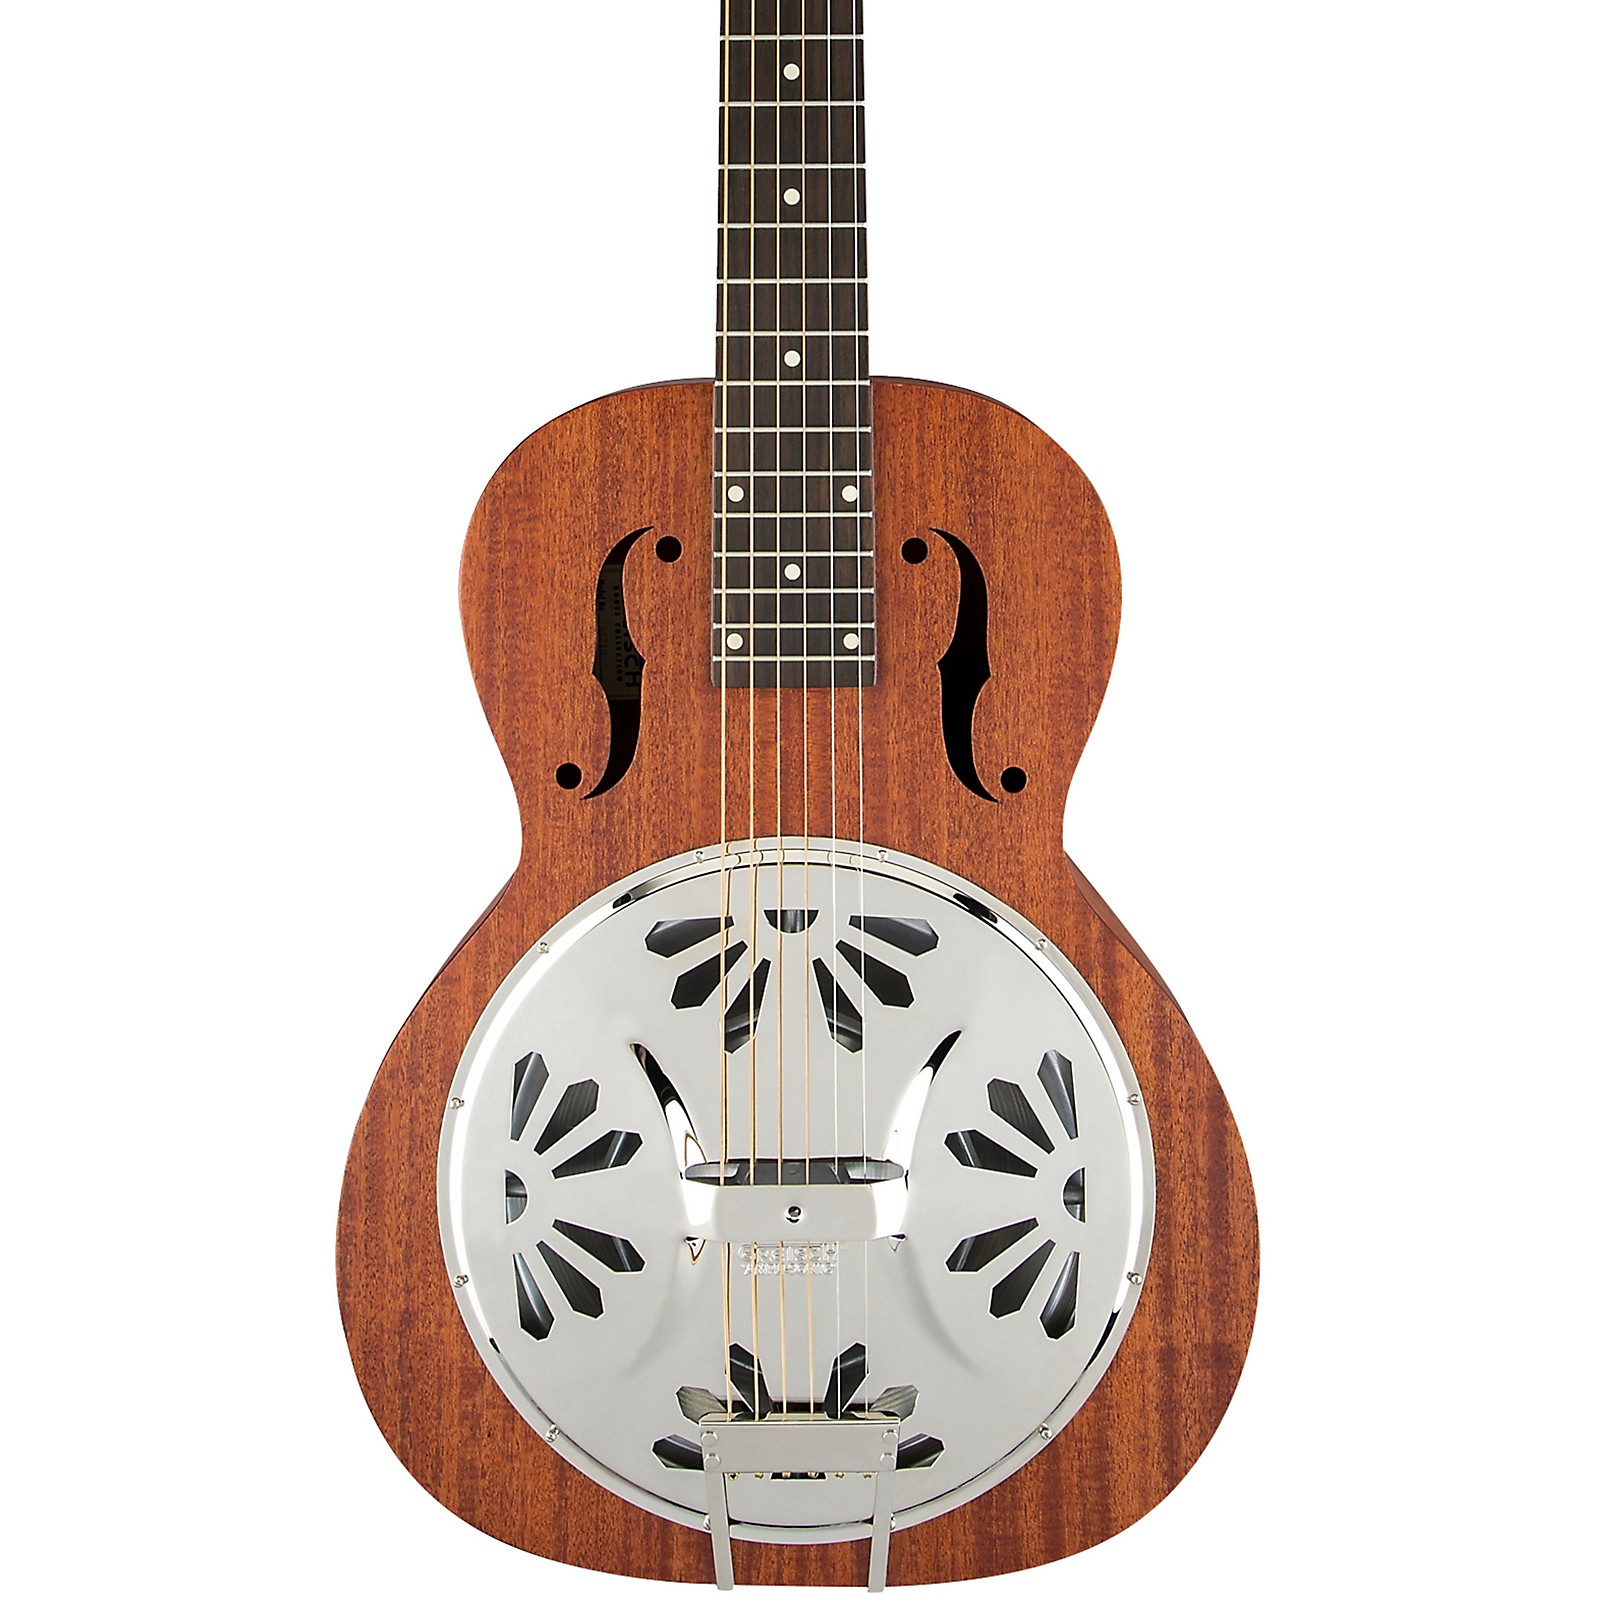 Gretsch Guitars G9210 Boxcar Square-Neck Resonator Guitar With 